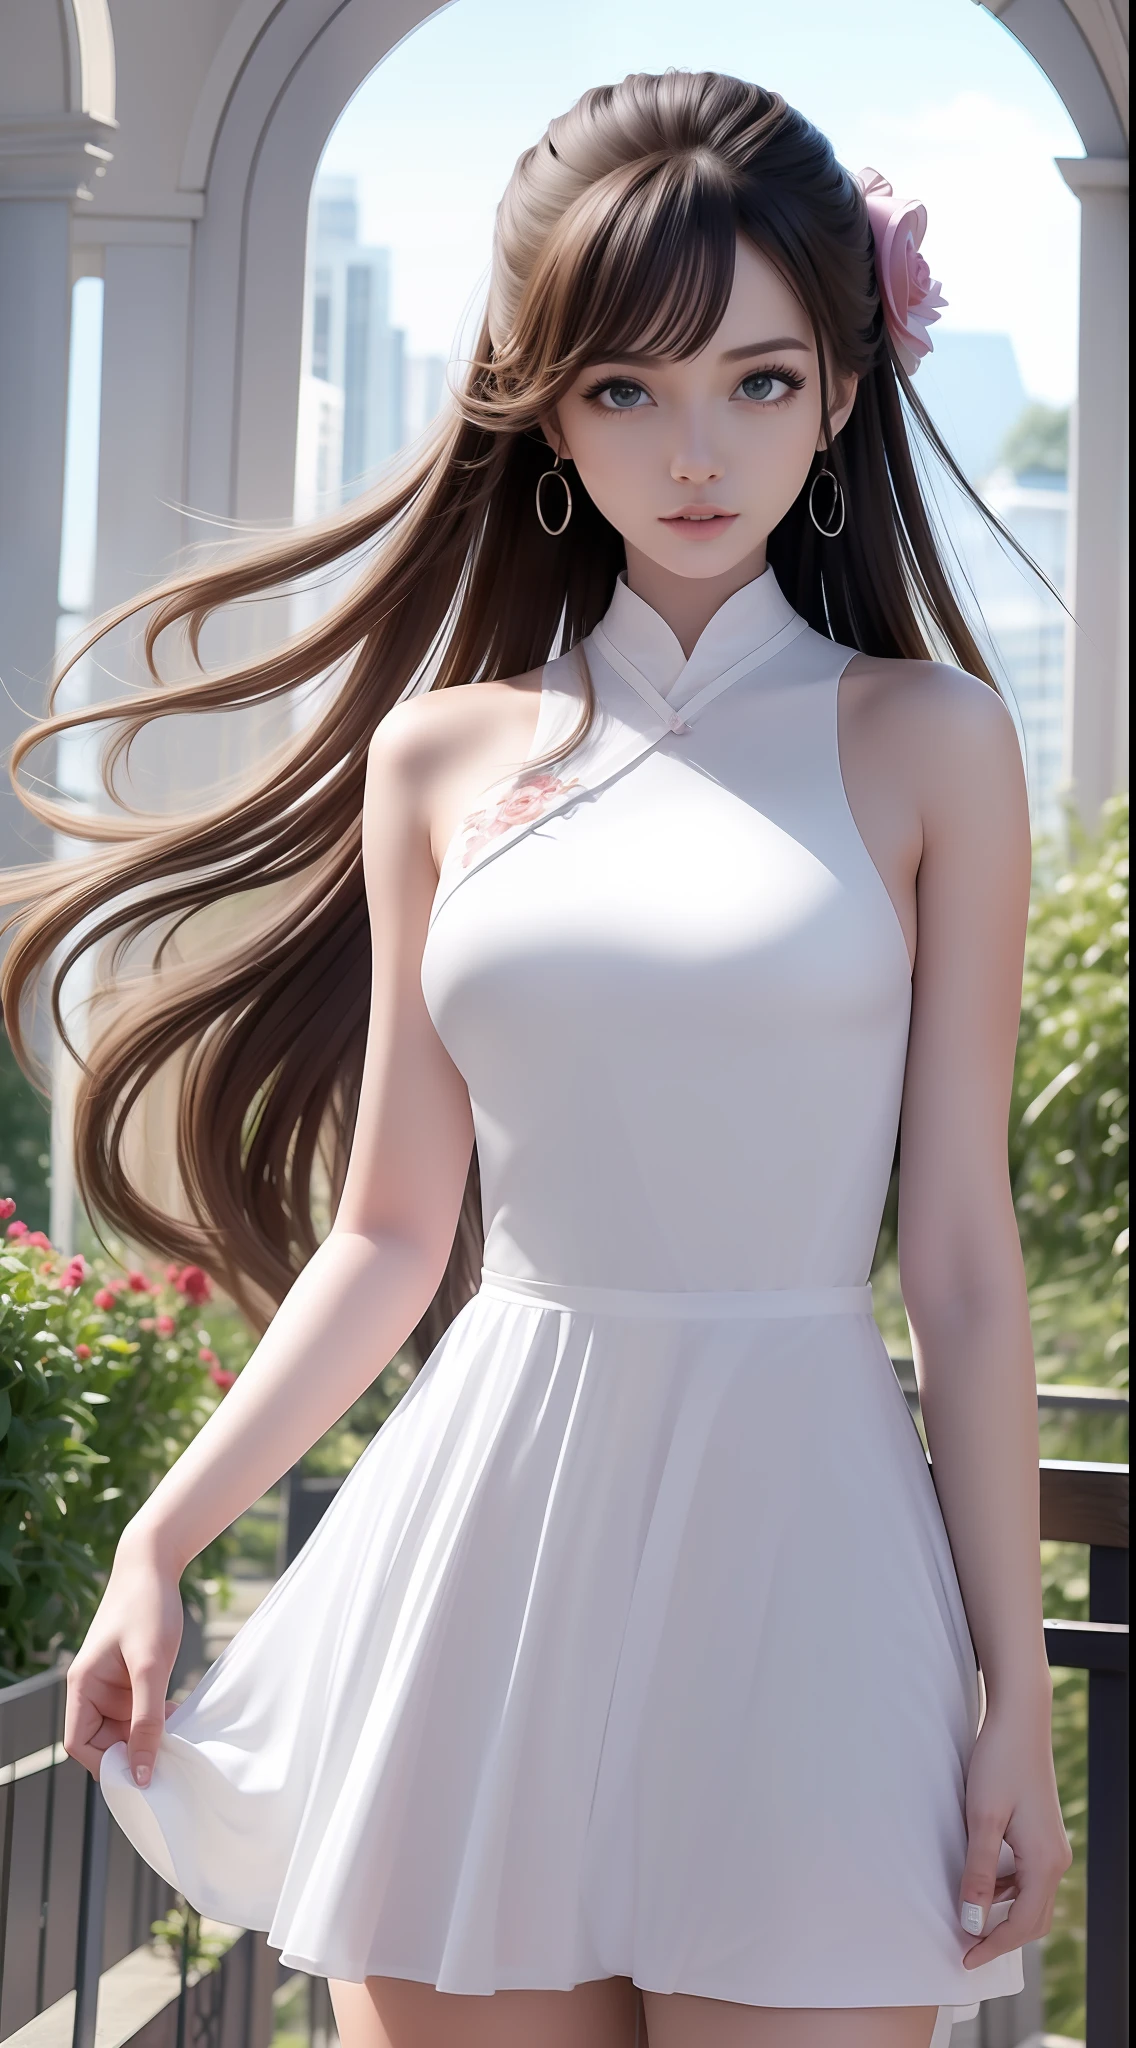 4k ultra hd, masterpiece, very high quality, a girl, beautiful, good face, smooth face, detailed eyes, beautiful hair, very long hair, hair band, medium breasts, wait 40kg, hight 5.2 feet, cute look, modern clothes, white shirt, blue jeans, good shoes, morning background, buildings, sun lights, clear weather, stylish looking,